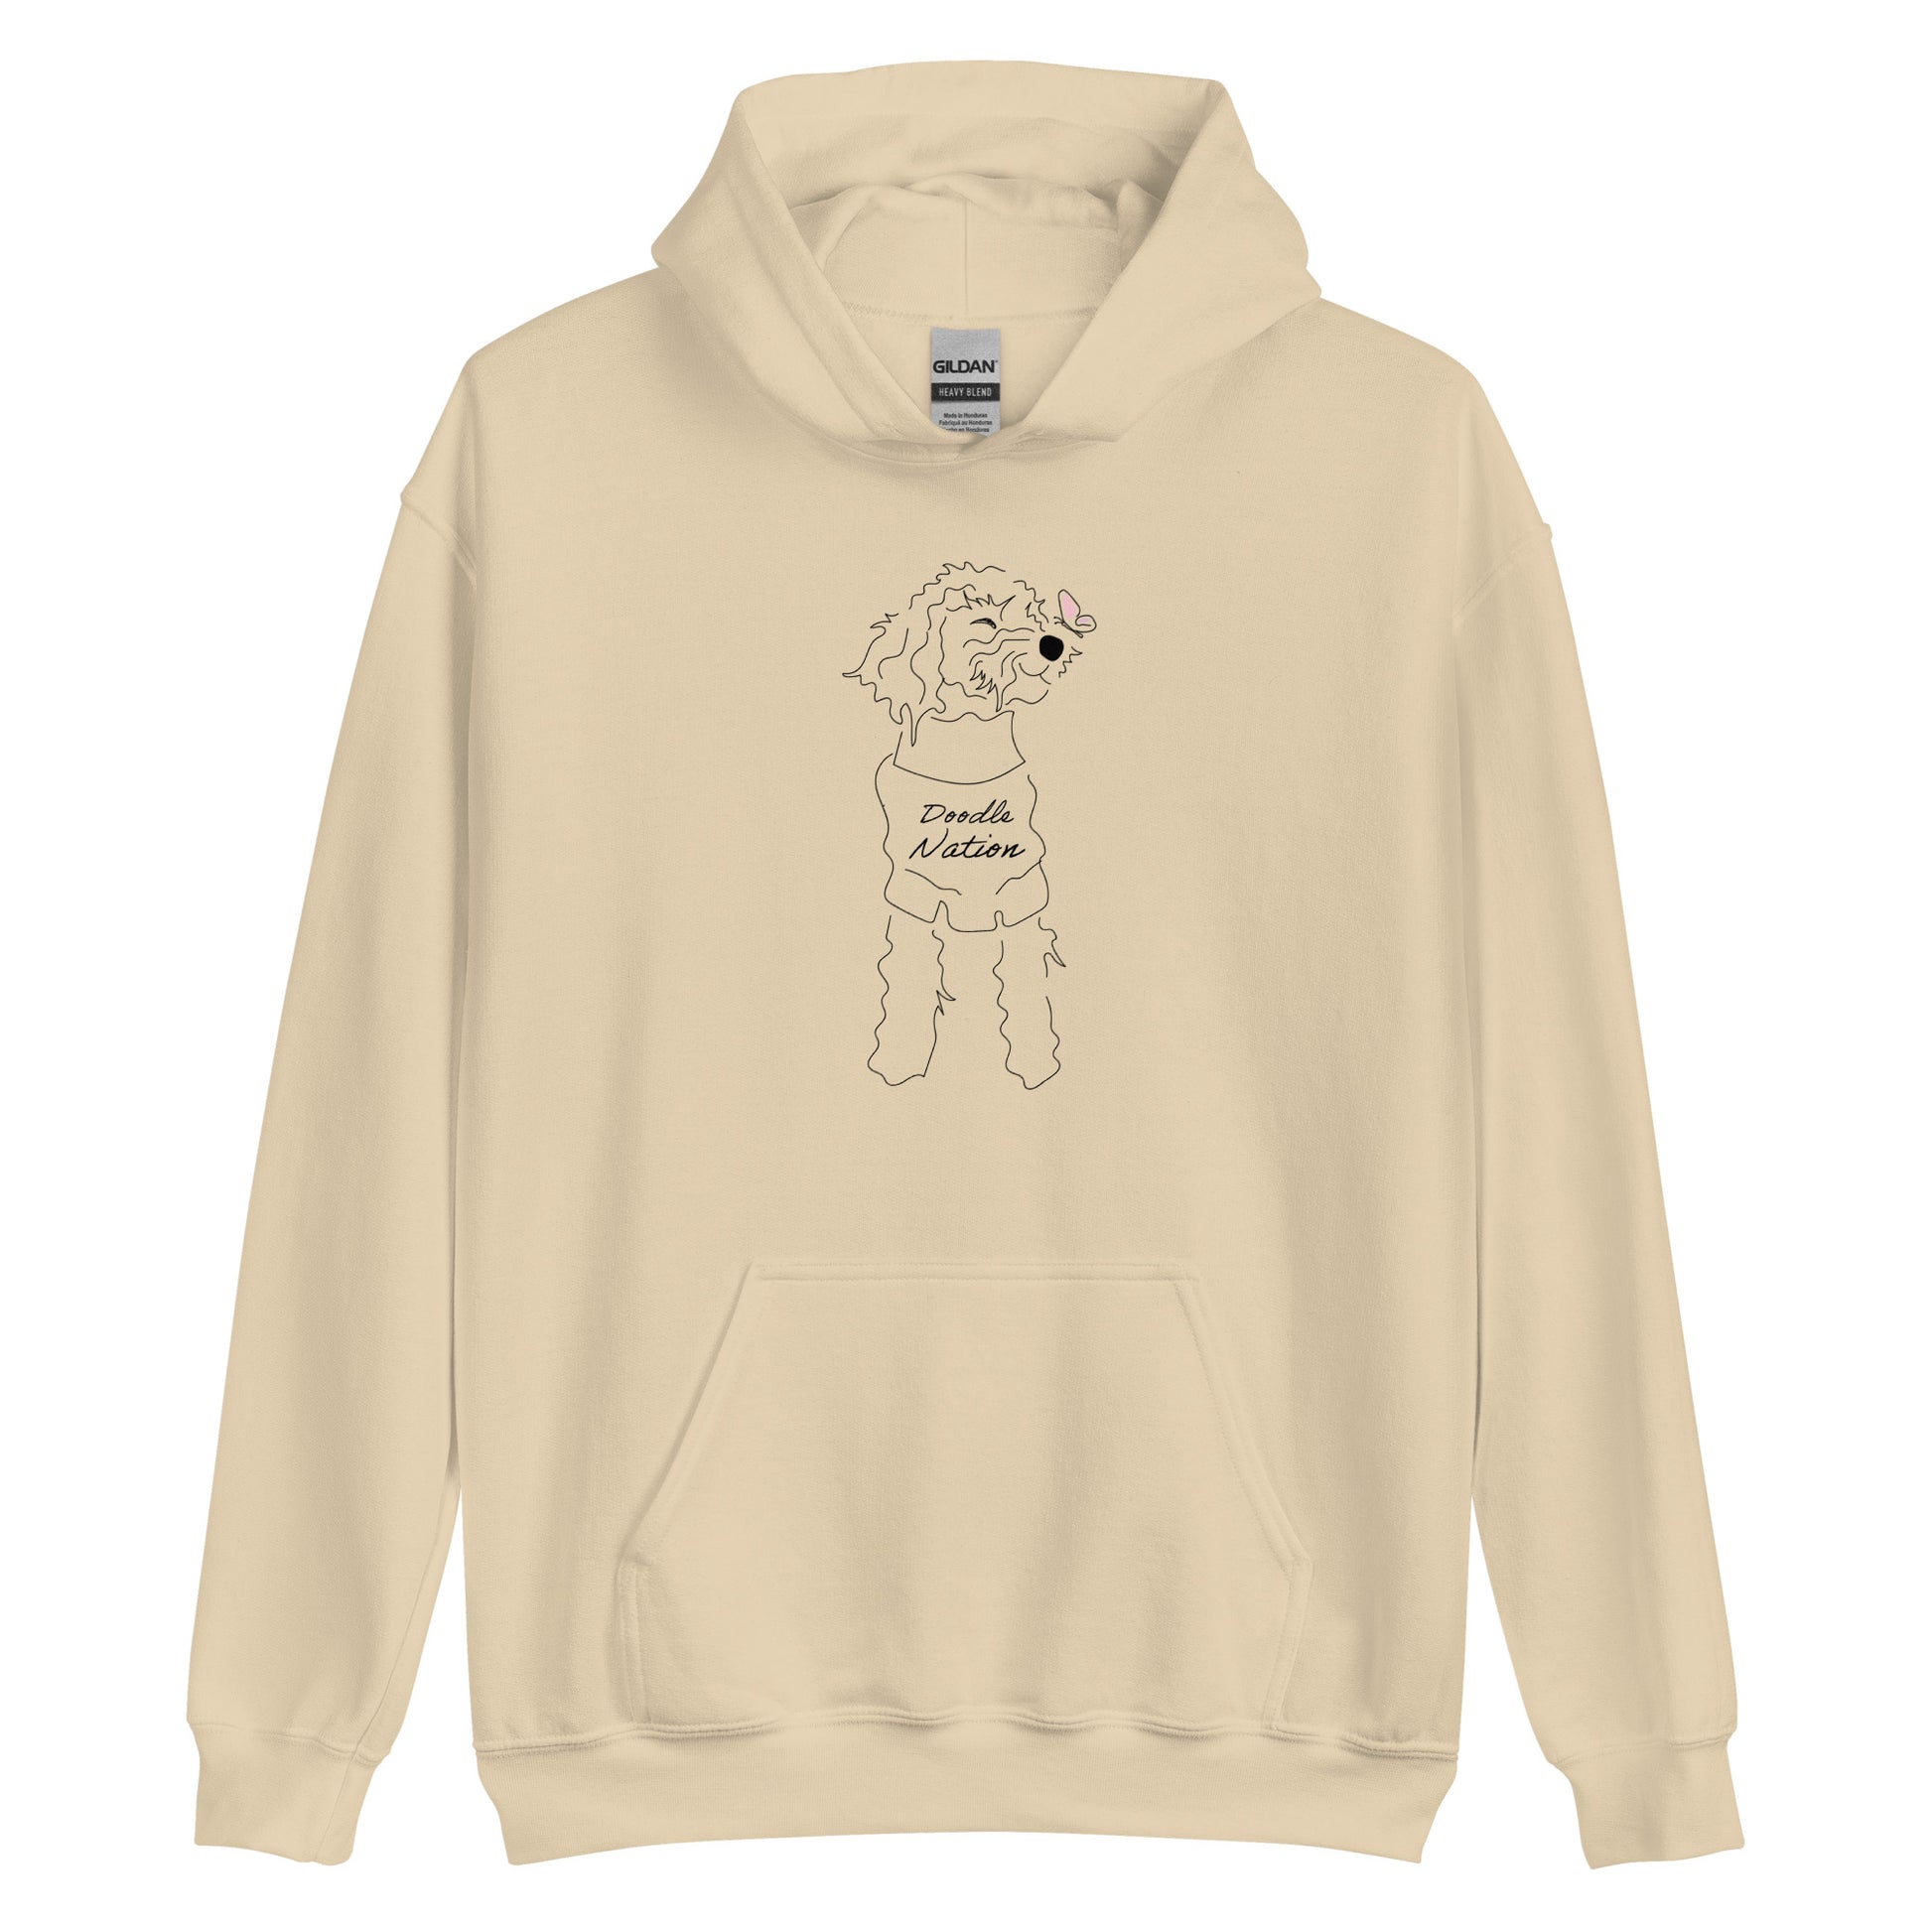 Goldendoodle hoodie with Goldendoodle dog face and words "Doodle Nation" in  sand color